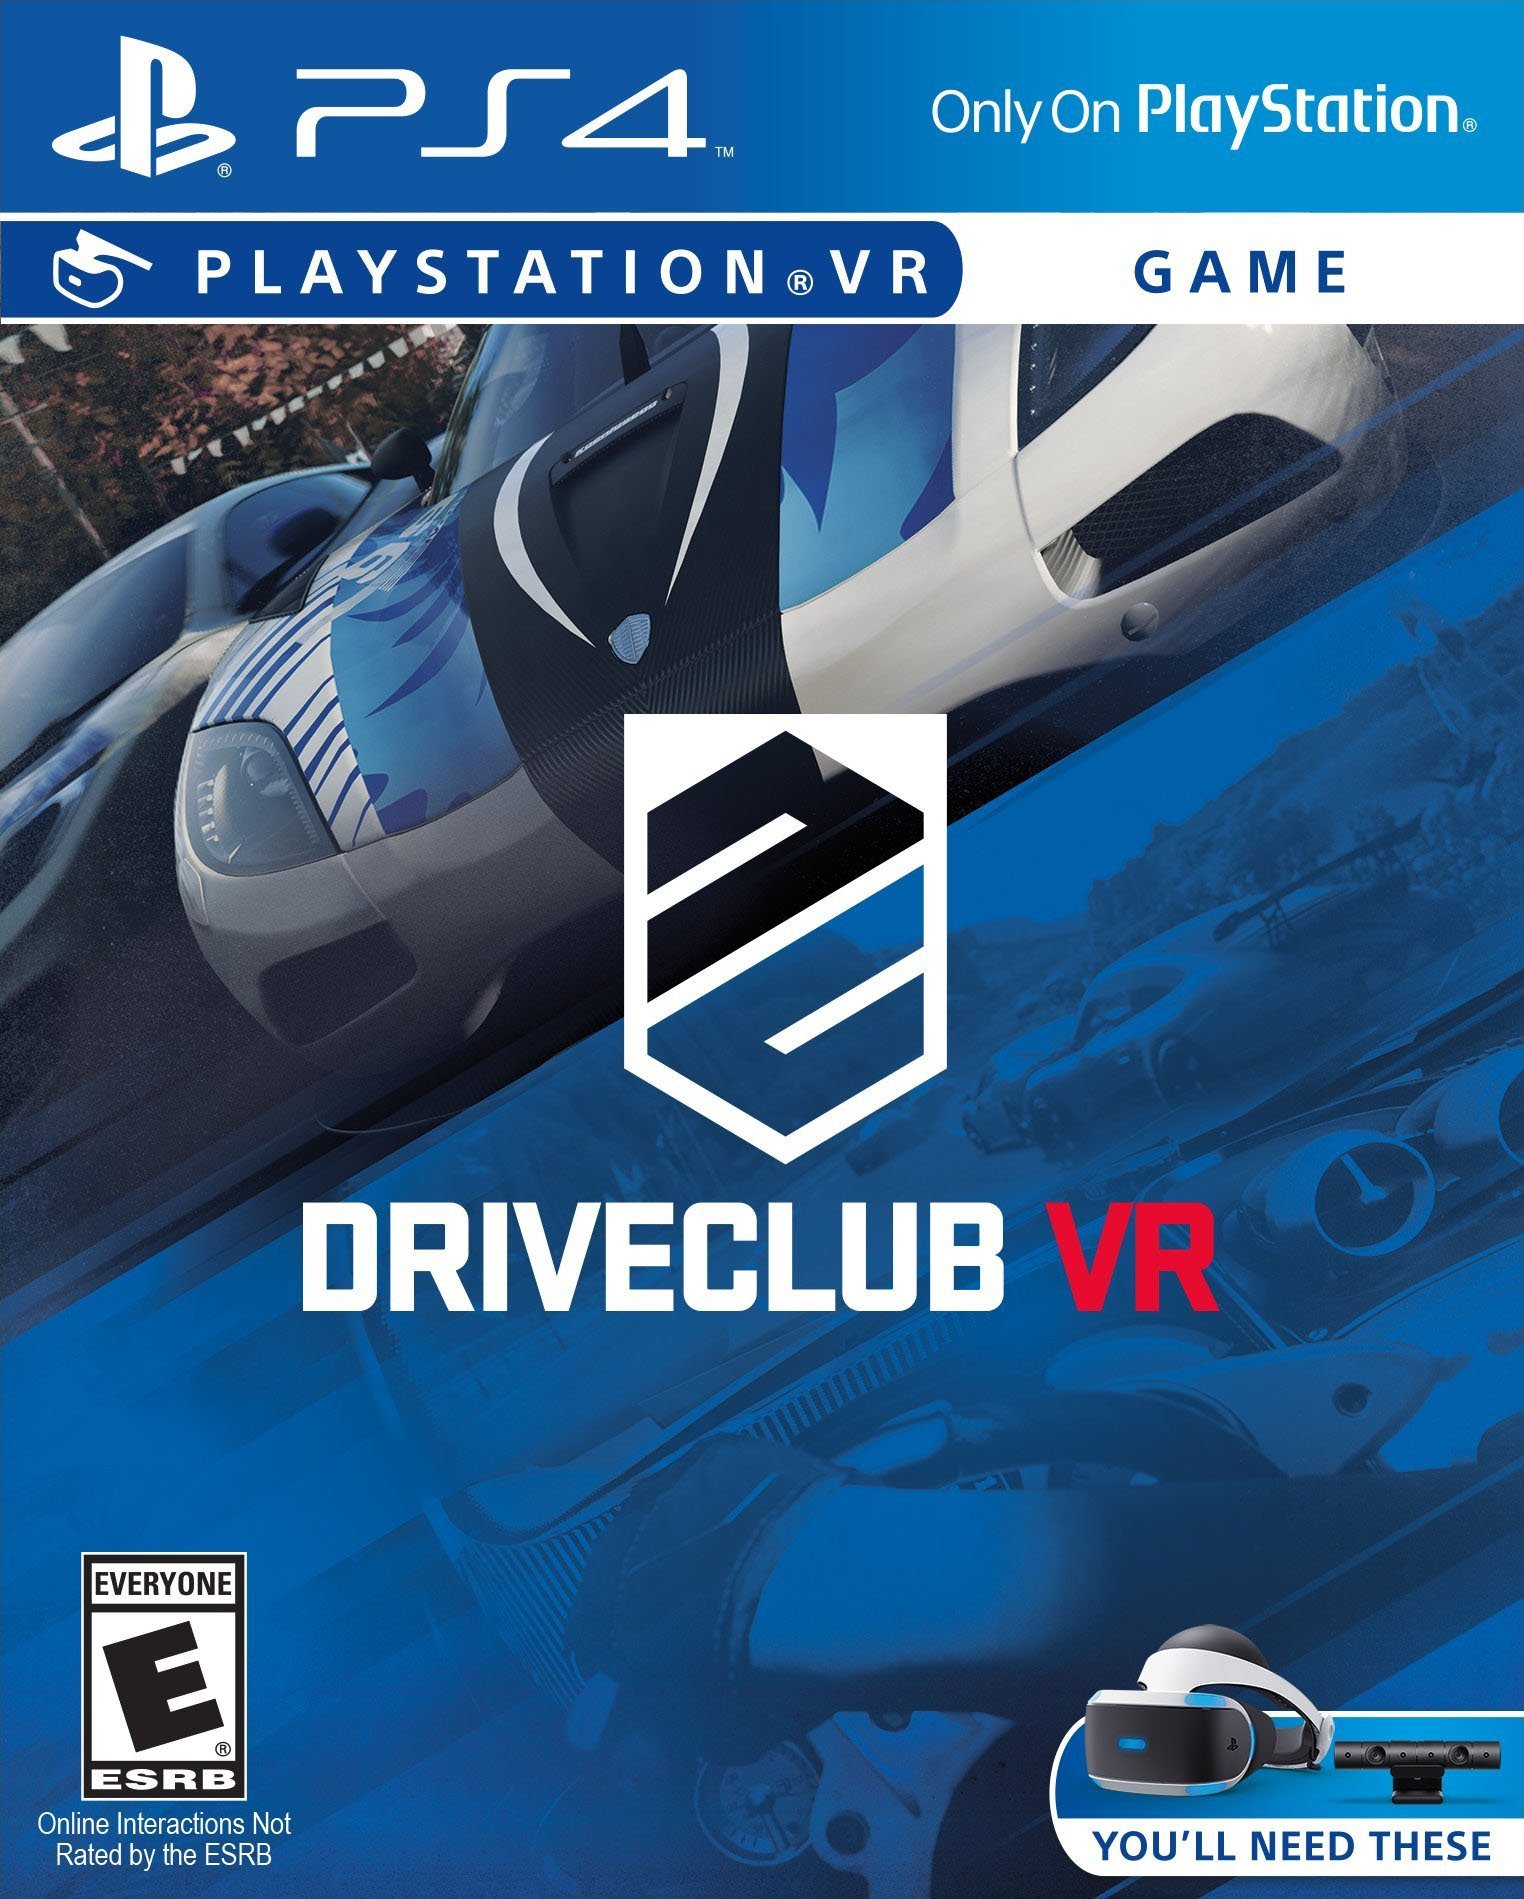 Driveclub VR [PS4 Exclusive VR] 5.05 / 6.72 / 7.02 [EUR] (2016) [Русский] (v1.01)